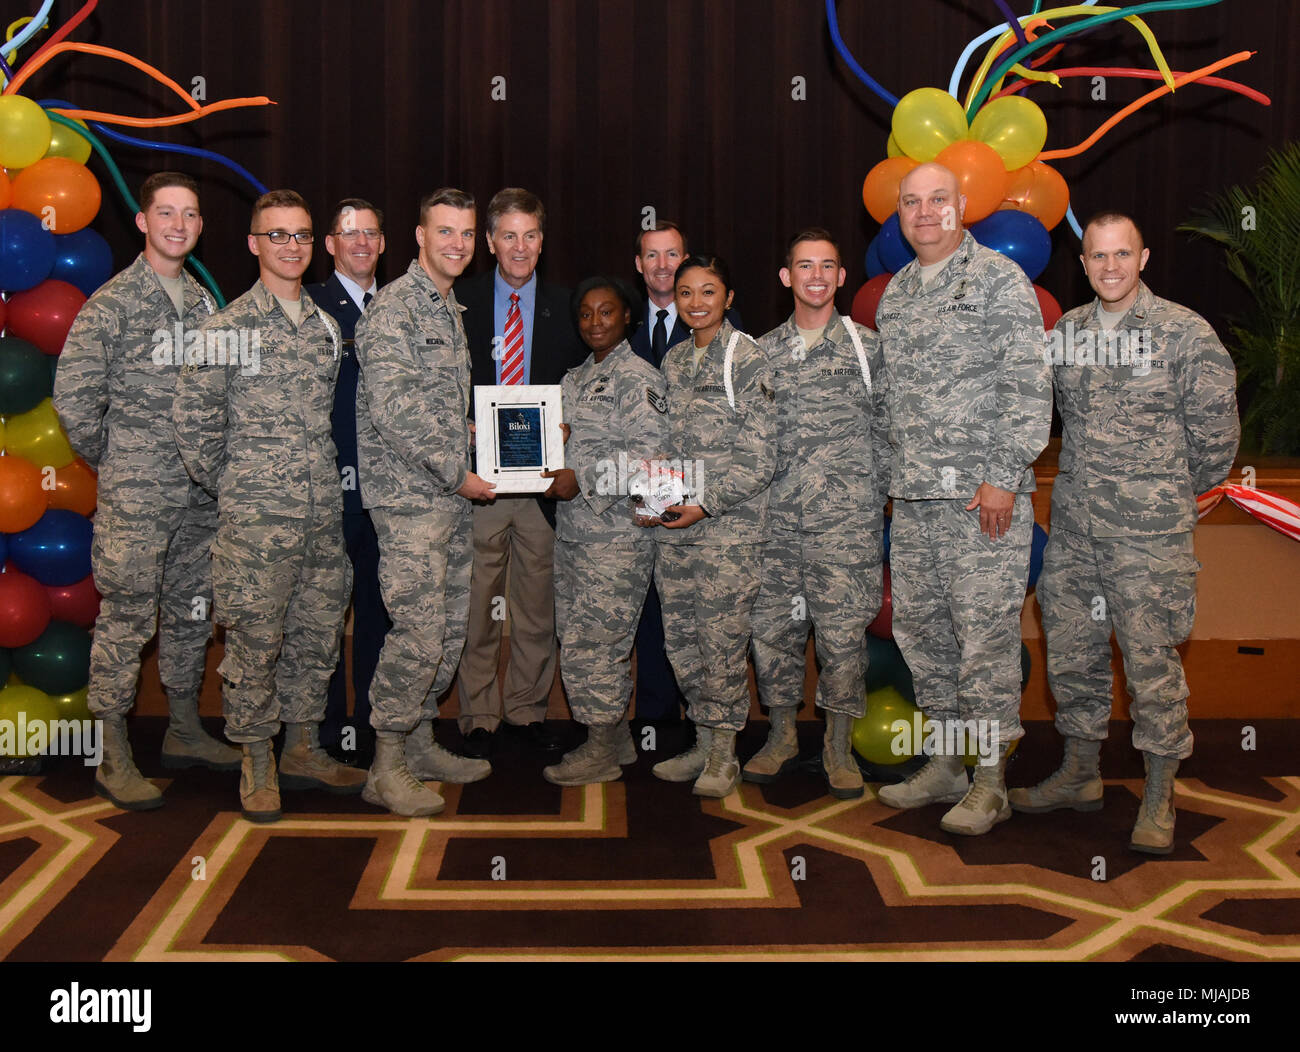 Members of the Keesler Air Force Base Fishbowl Student Ministry Center  White Rope Program pose for a photo after accepting the Military Group  Volunteer of the Year award during the 35th Annual